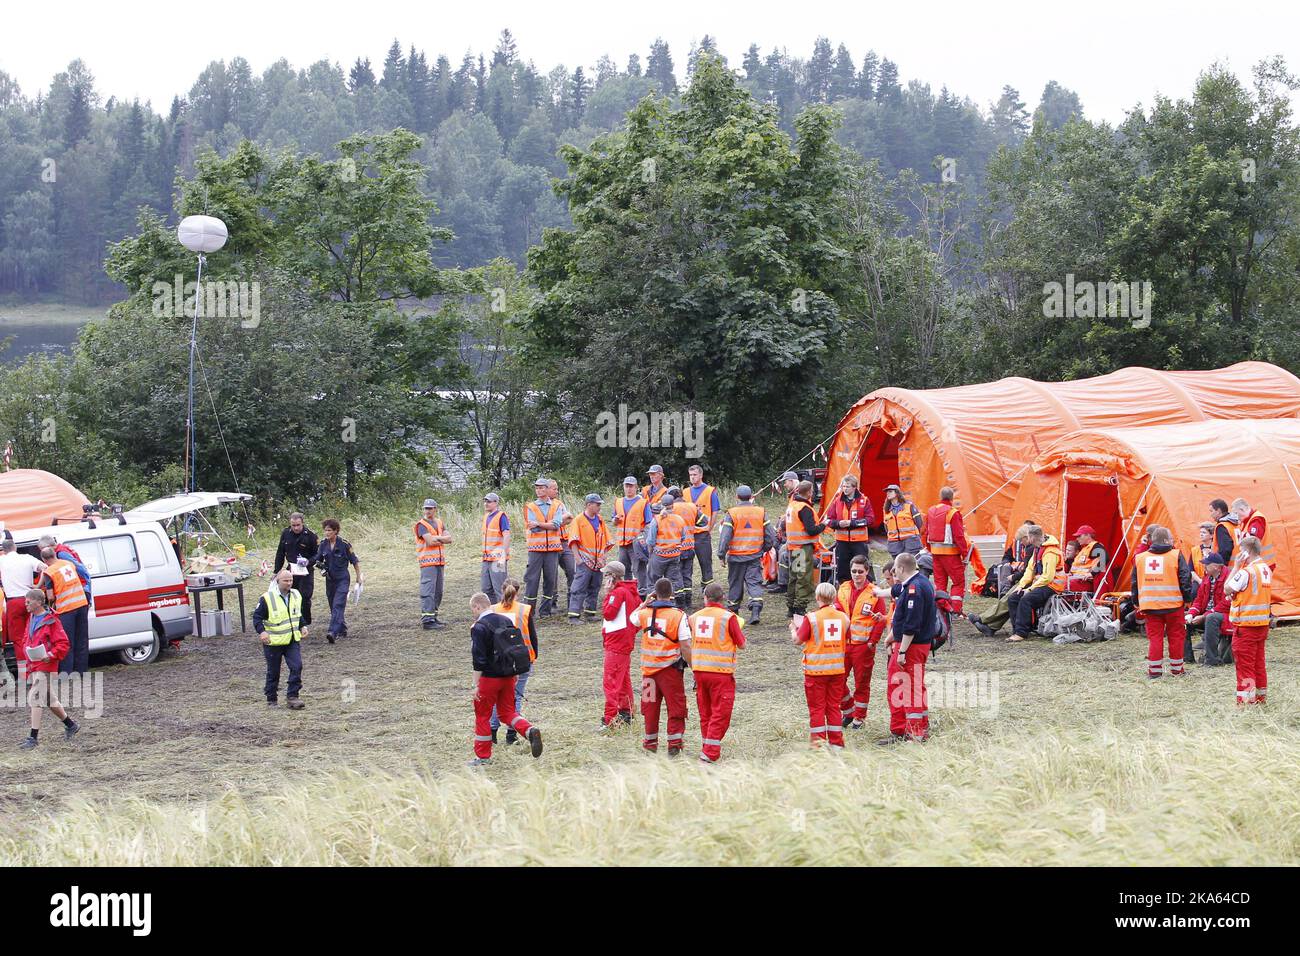 Sundvolden 20110723. Utoya youth massacre aftermath. Rescue and search work is operated from this base at Storoya in Tyrifjord.  Photo: Haakon Mosvold Larsen / Scanpix Norway  Stock Photo